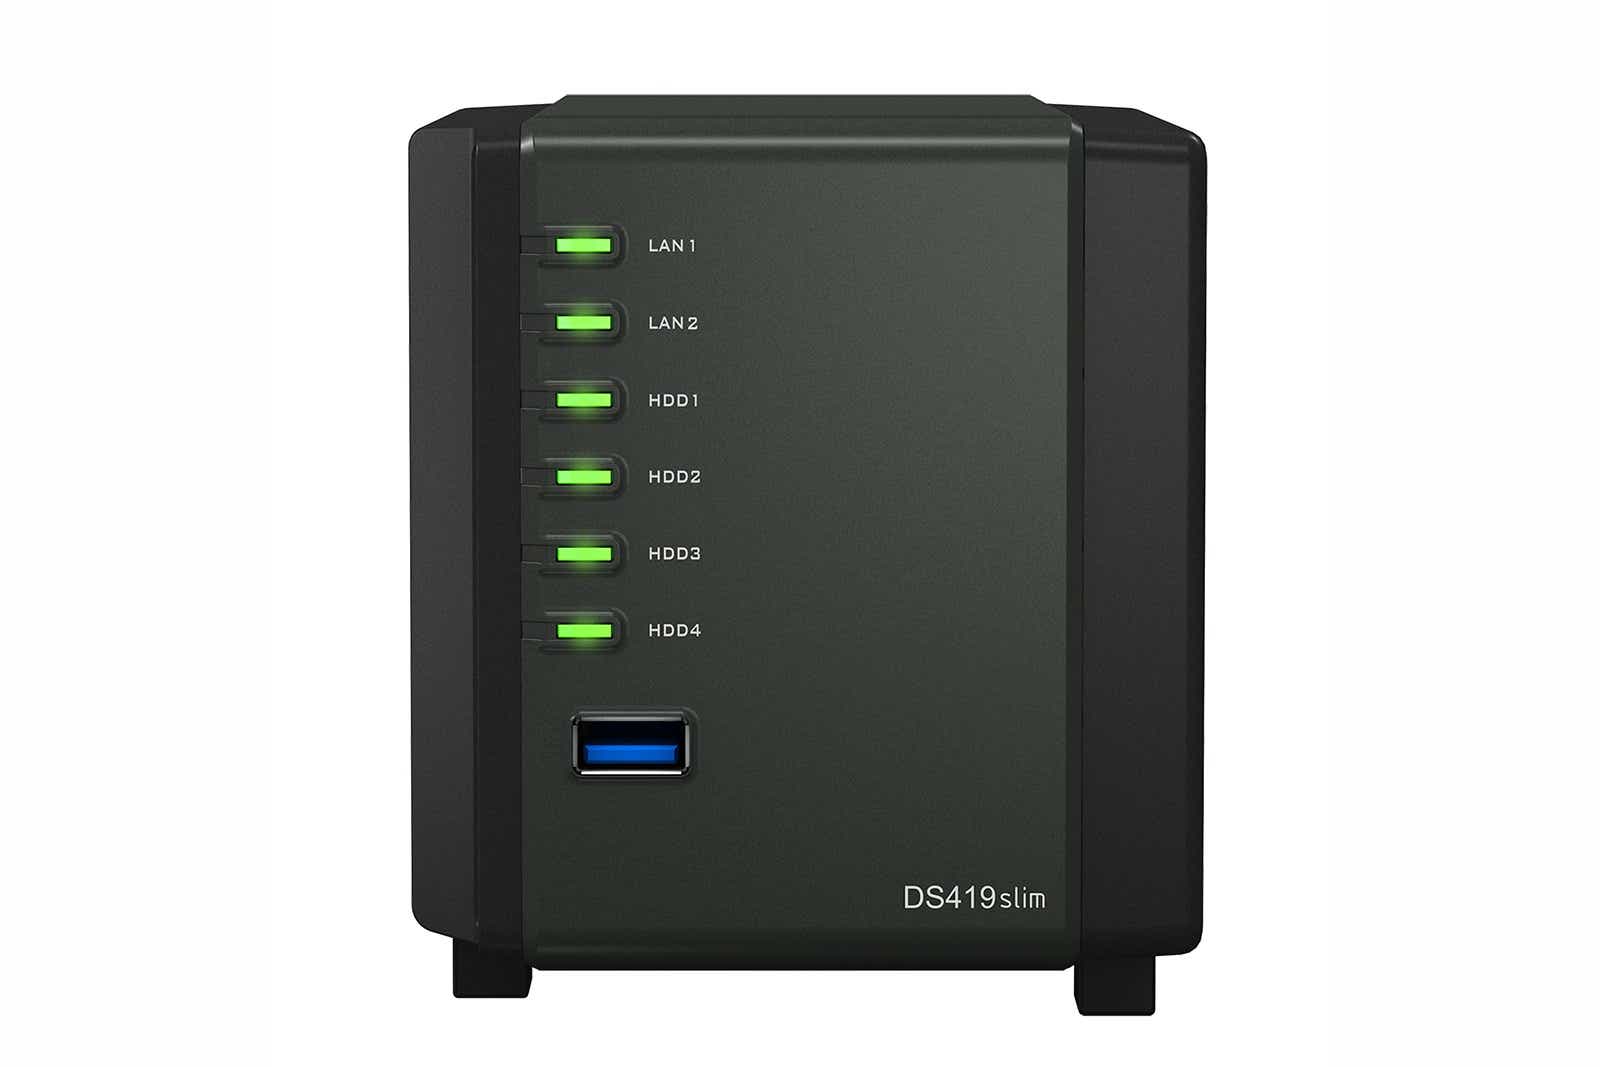 Synology DS419slim 4-bay NAS box (unpopulated)